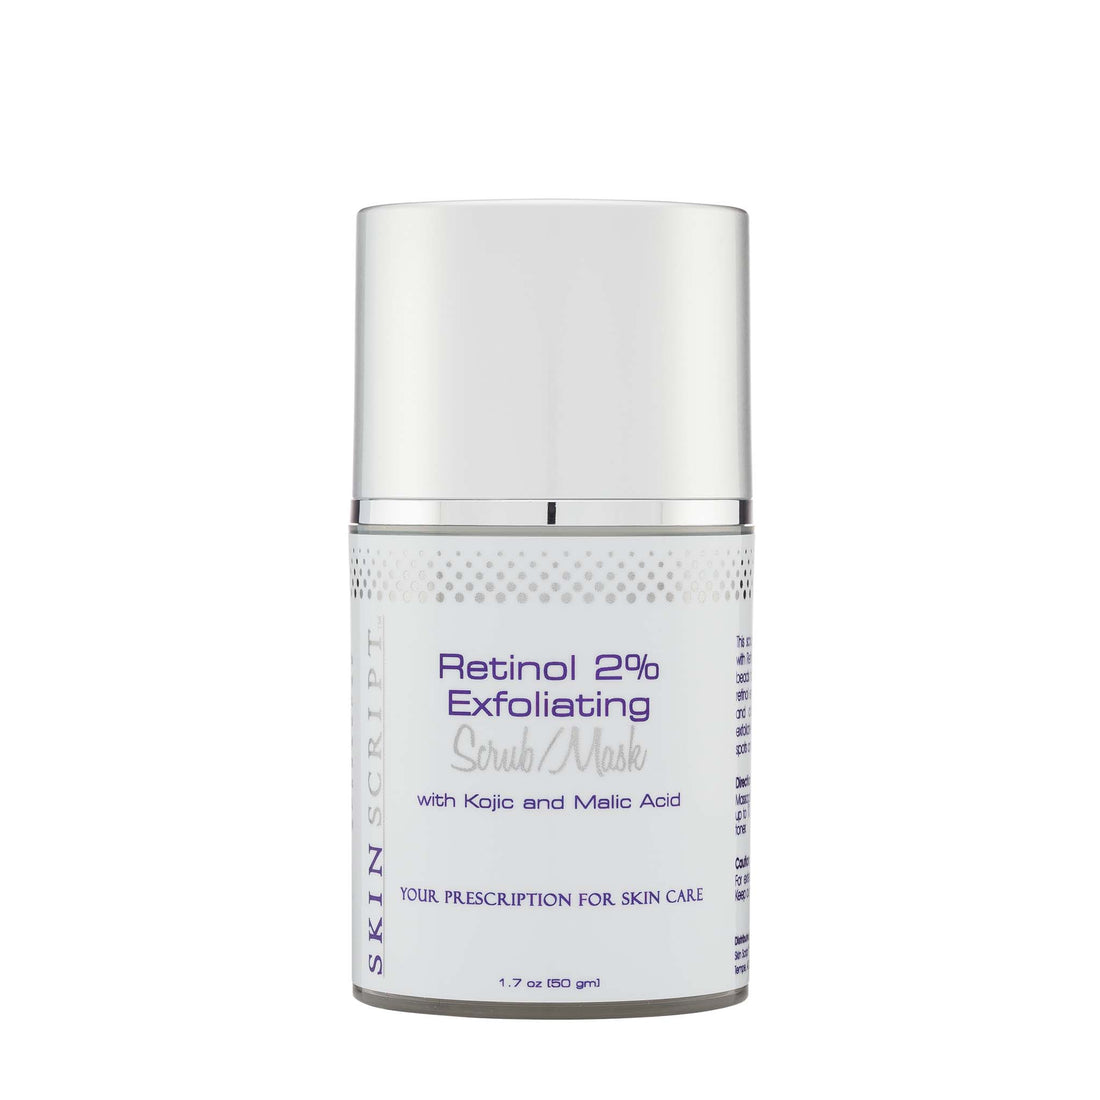 Skin Script Retinol Scrub encourages the breakup of blackheads and clogged pores while lightening pigmentation.